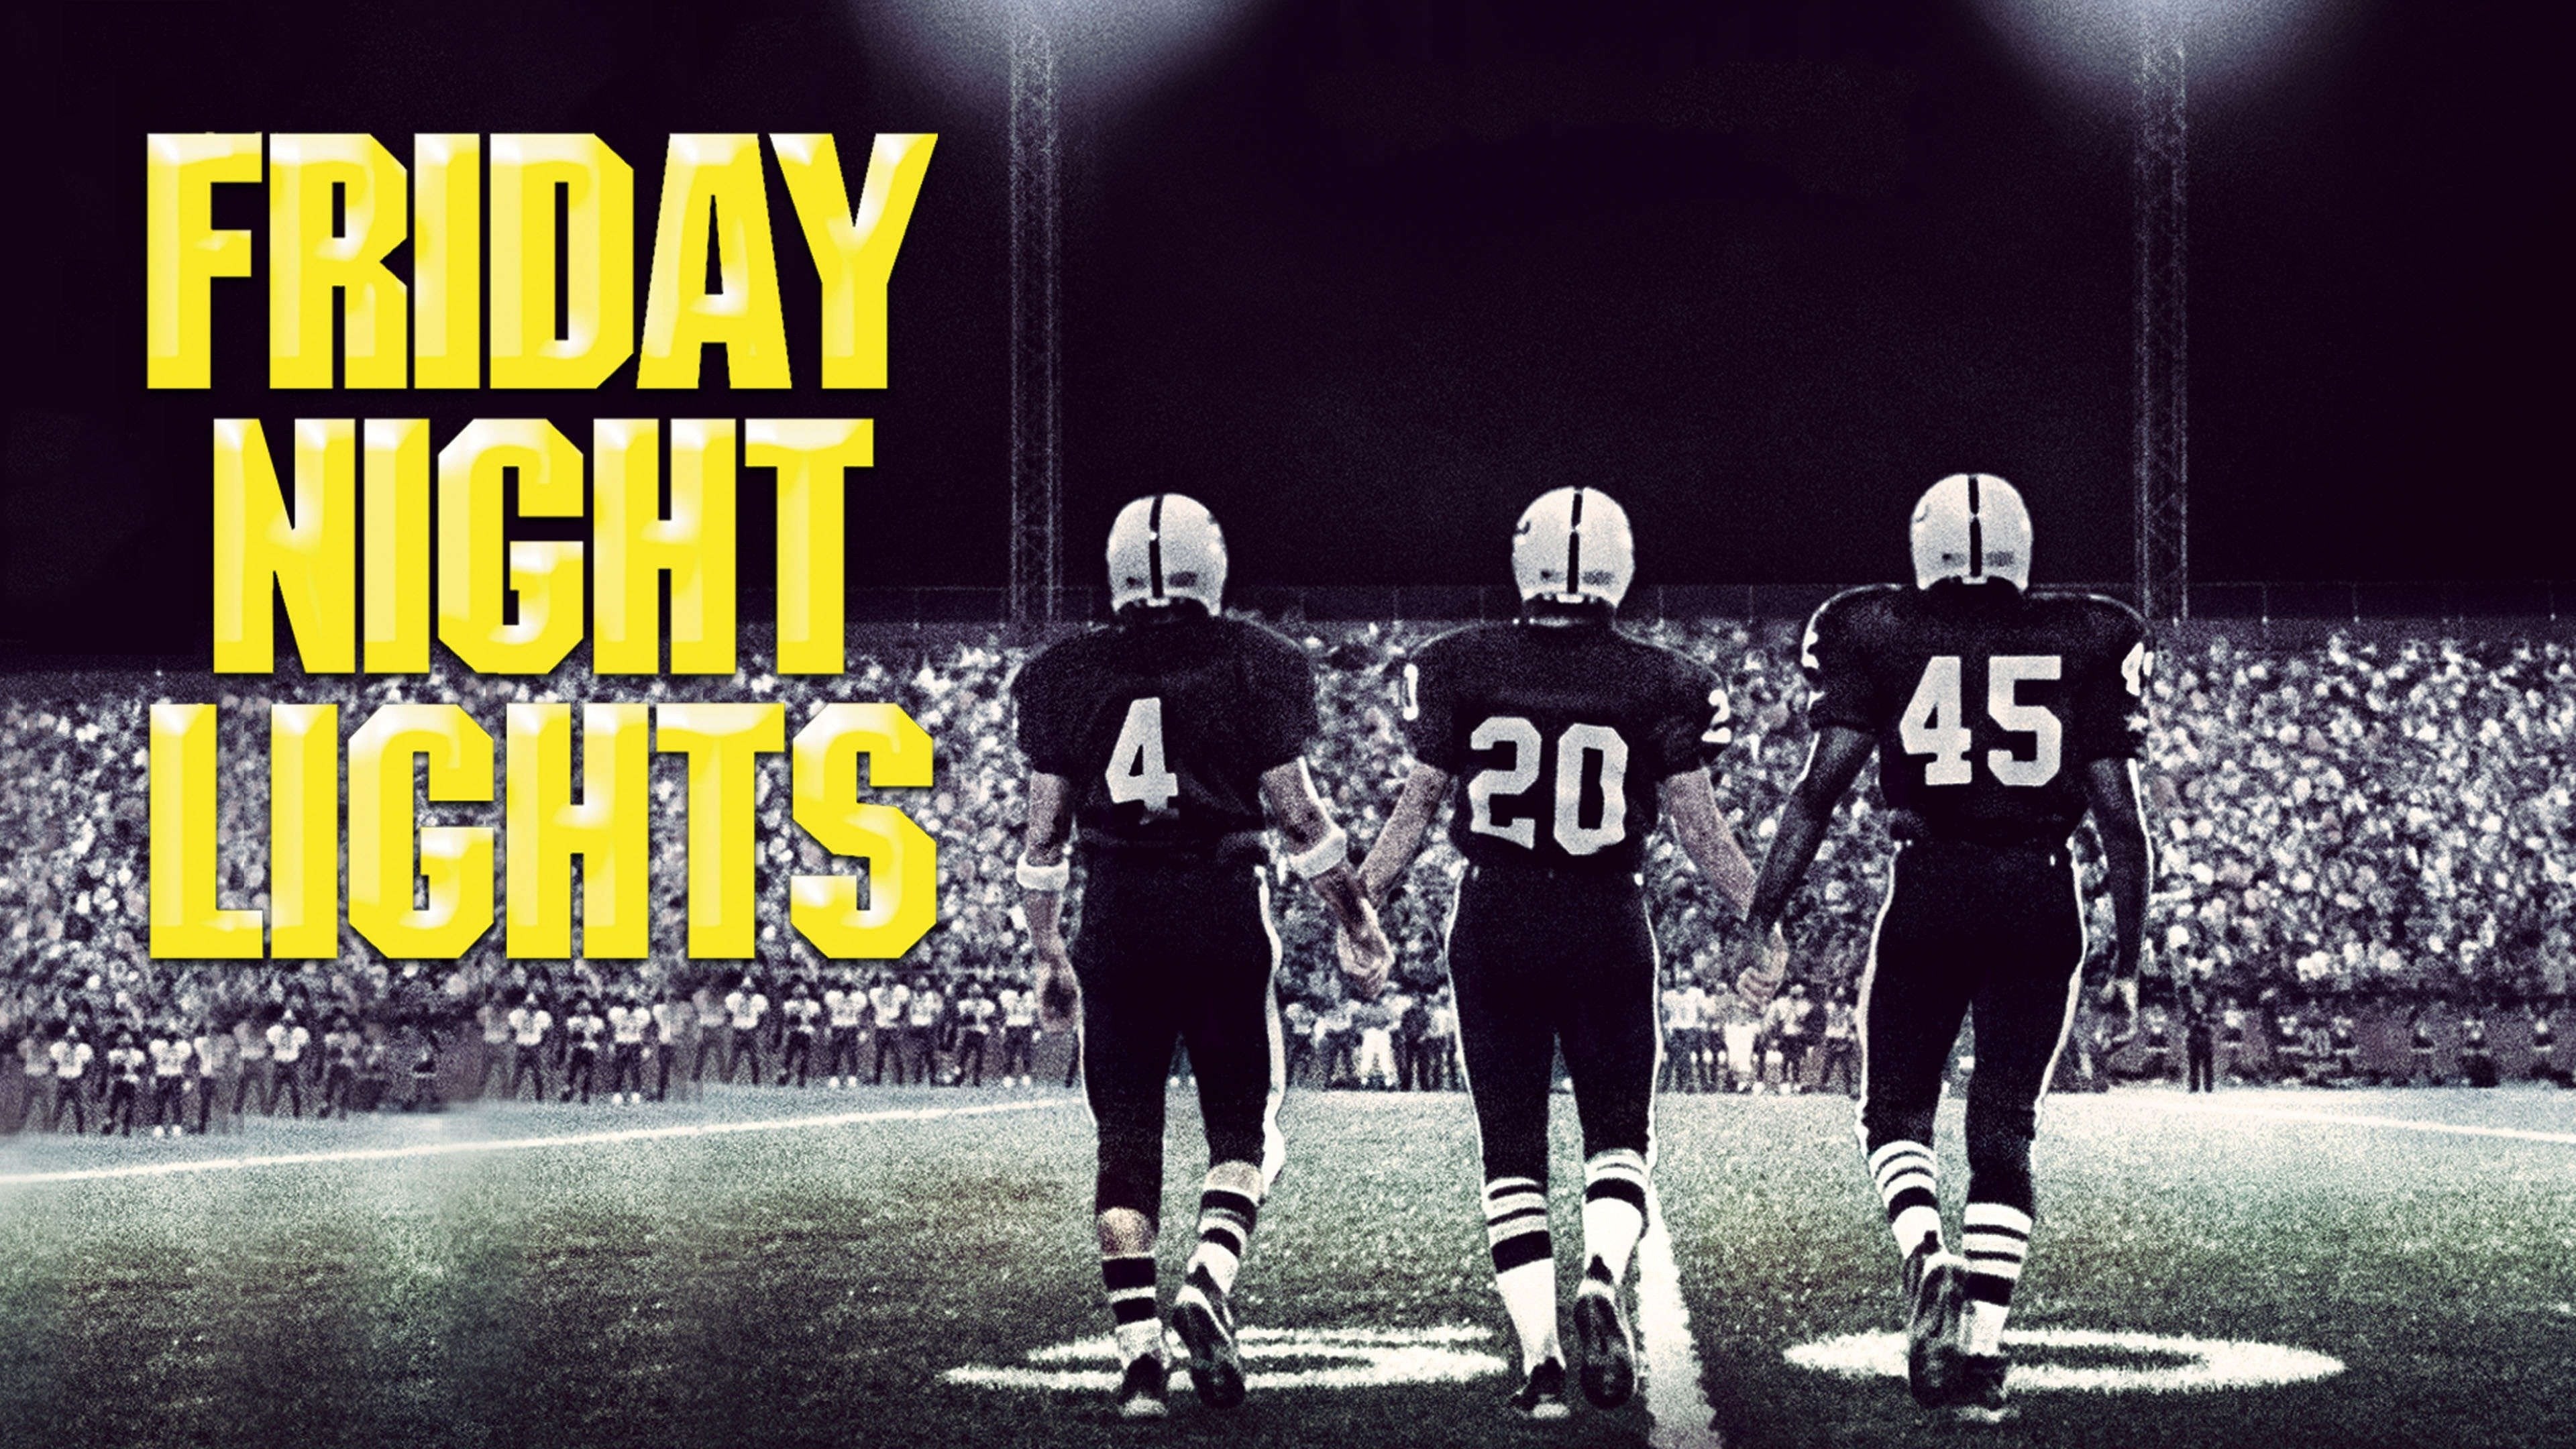 26 Facts About Friday Night Lights - FNL Trivia and Fun Facts